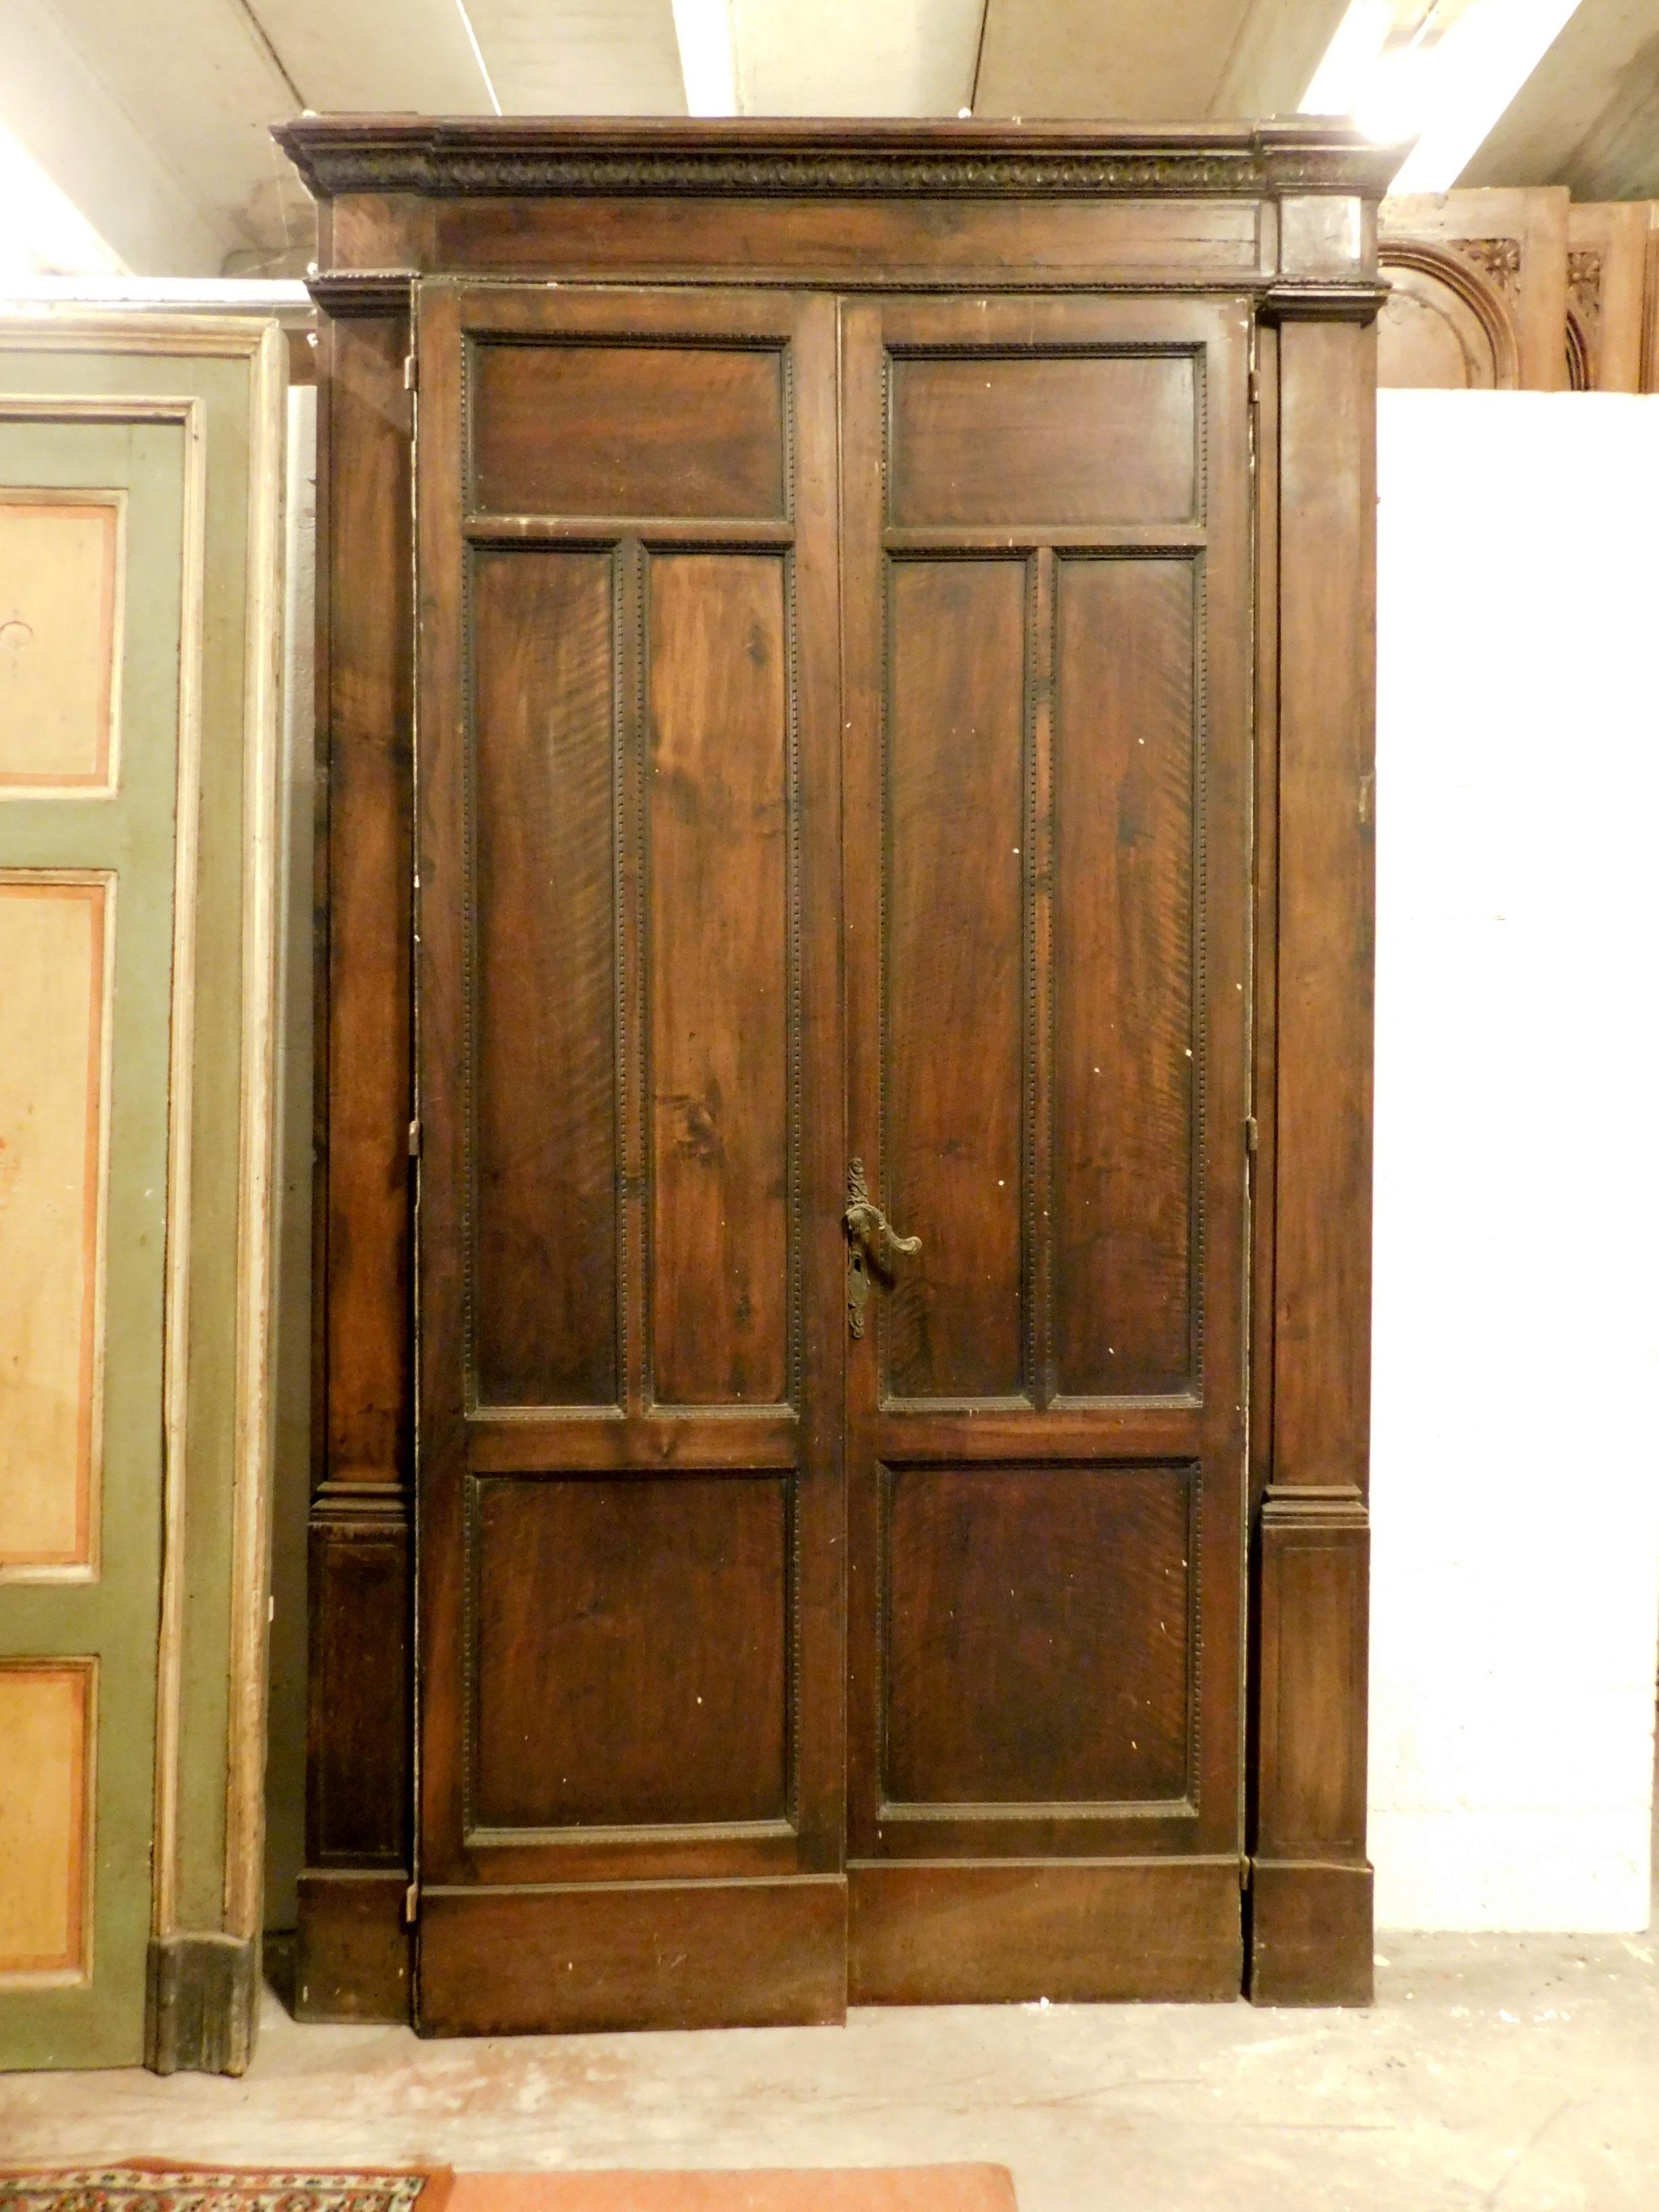 Antique double-wing door, carved in walnut and complete with frame, hand-built in the first quarter of the 20th century, from Turin (Italy), maximum size 158 x 273 cm, door width 123 x 249 cm.
Beautiful and imposing, it separated a room from the